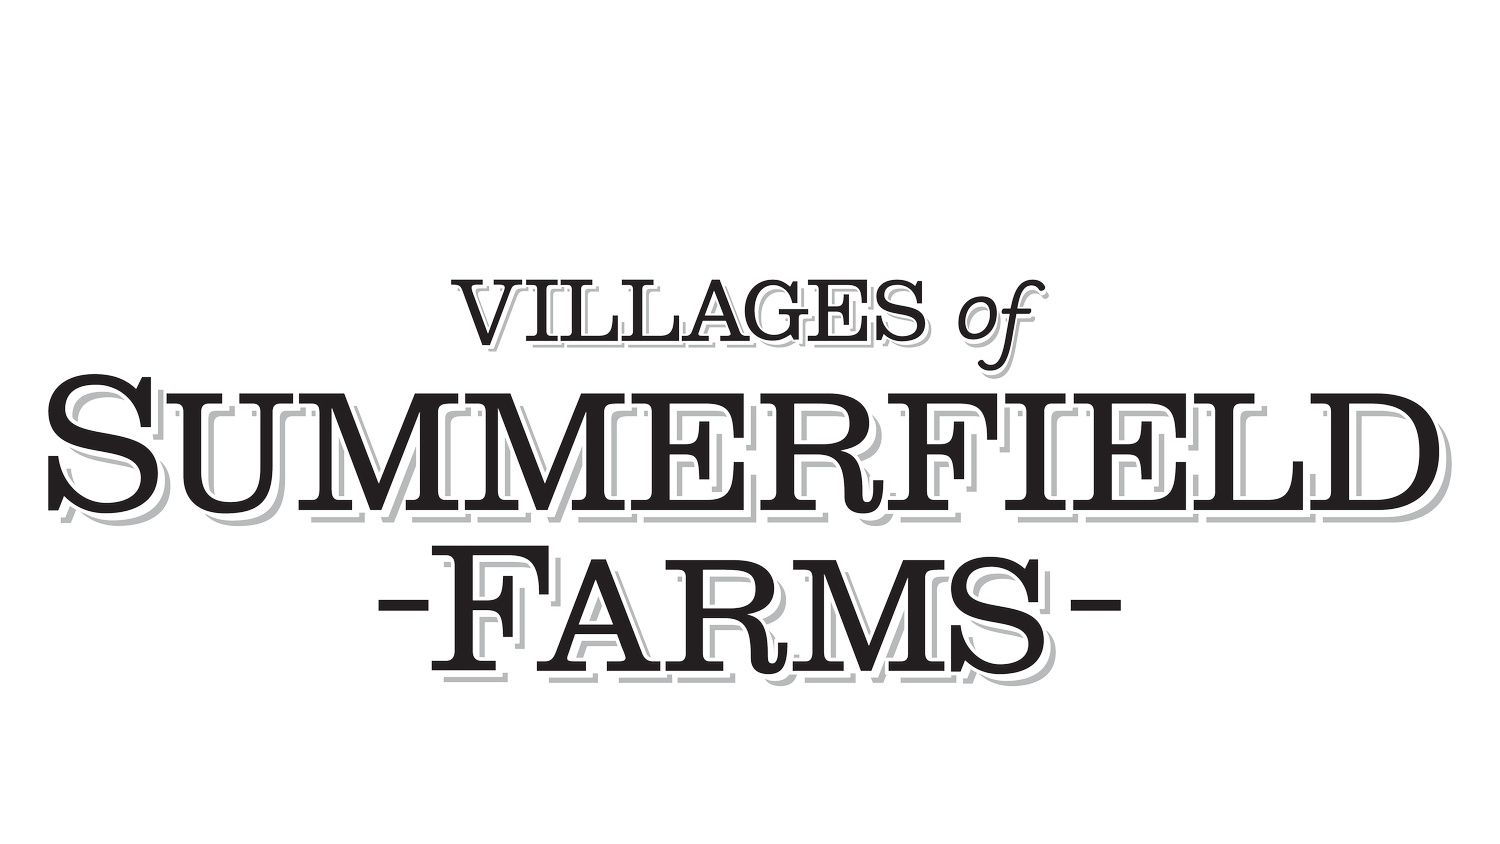 Villages of Summerfield Farms